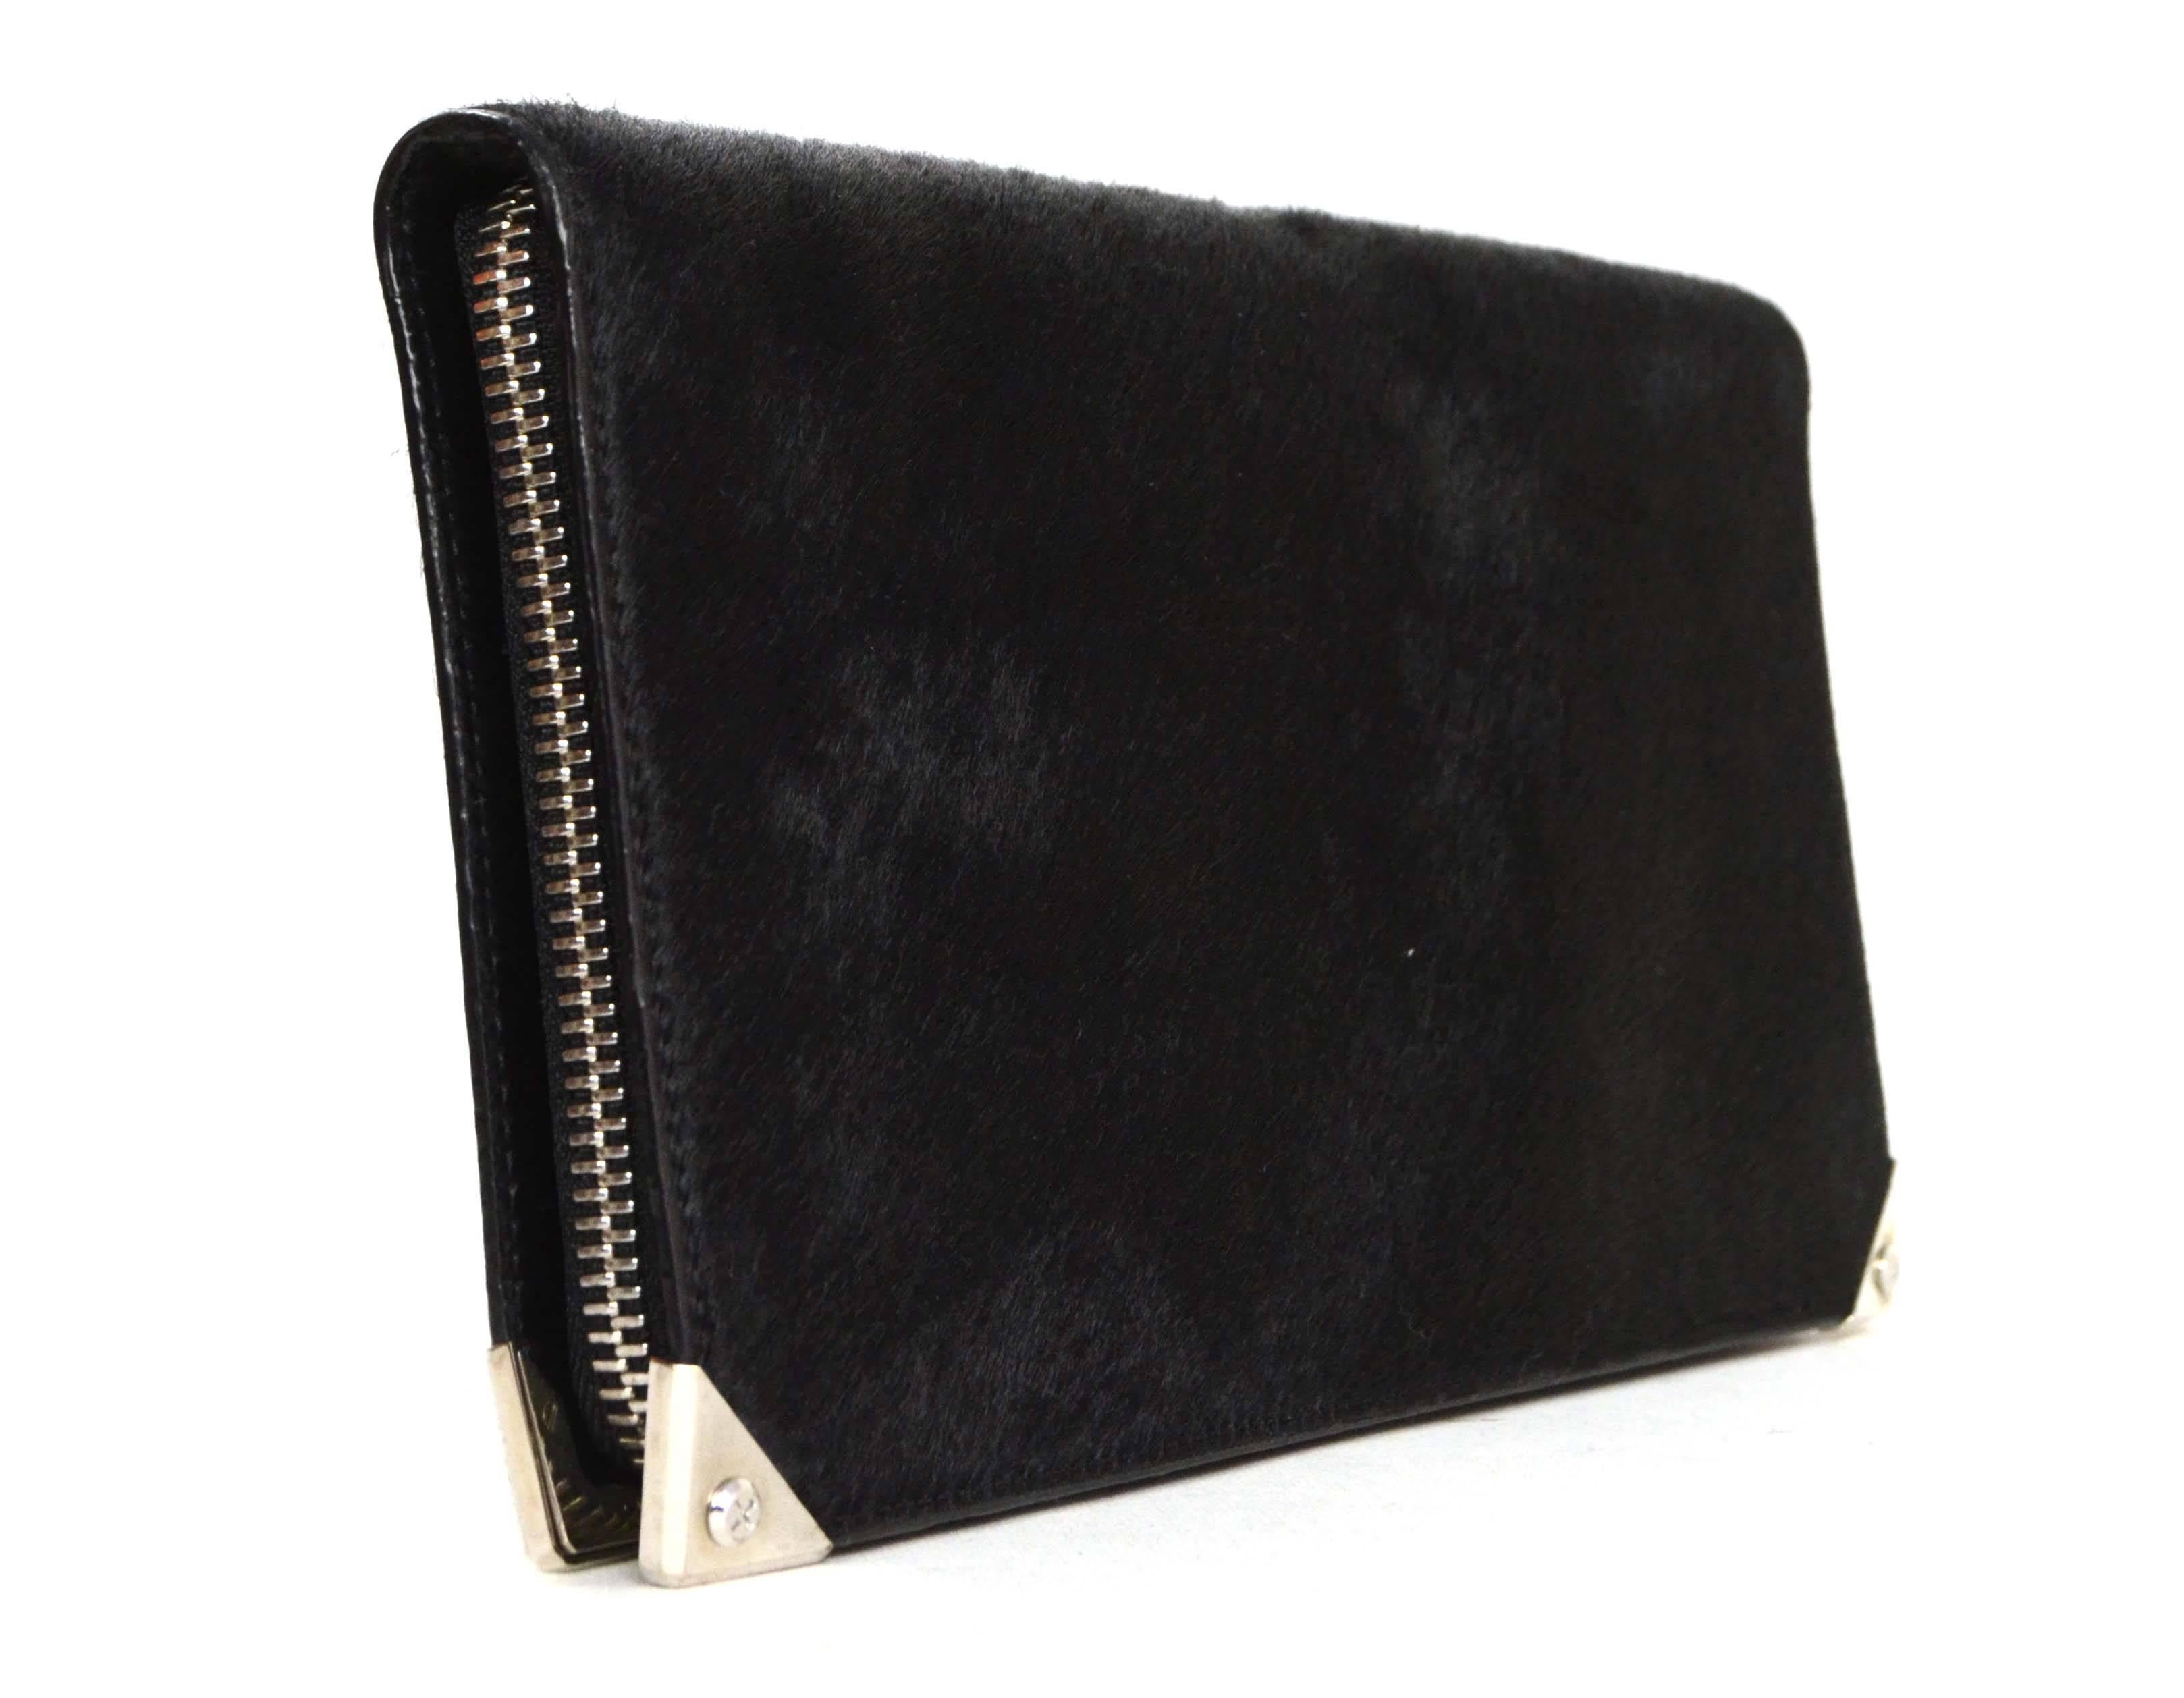 Alexander Wang Black Calfskin Prisma Clutch 
Features oversized silvertone hardware
Made In: China
Color: Black
Hardware: Silvertone
Materials: Calfskin and metal
Lining: Black leather
Closure/Opening: Bi-fold with zip around